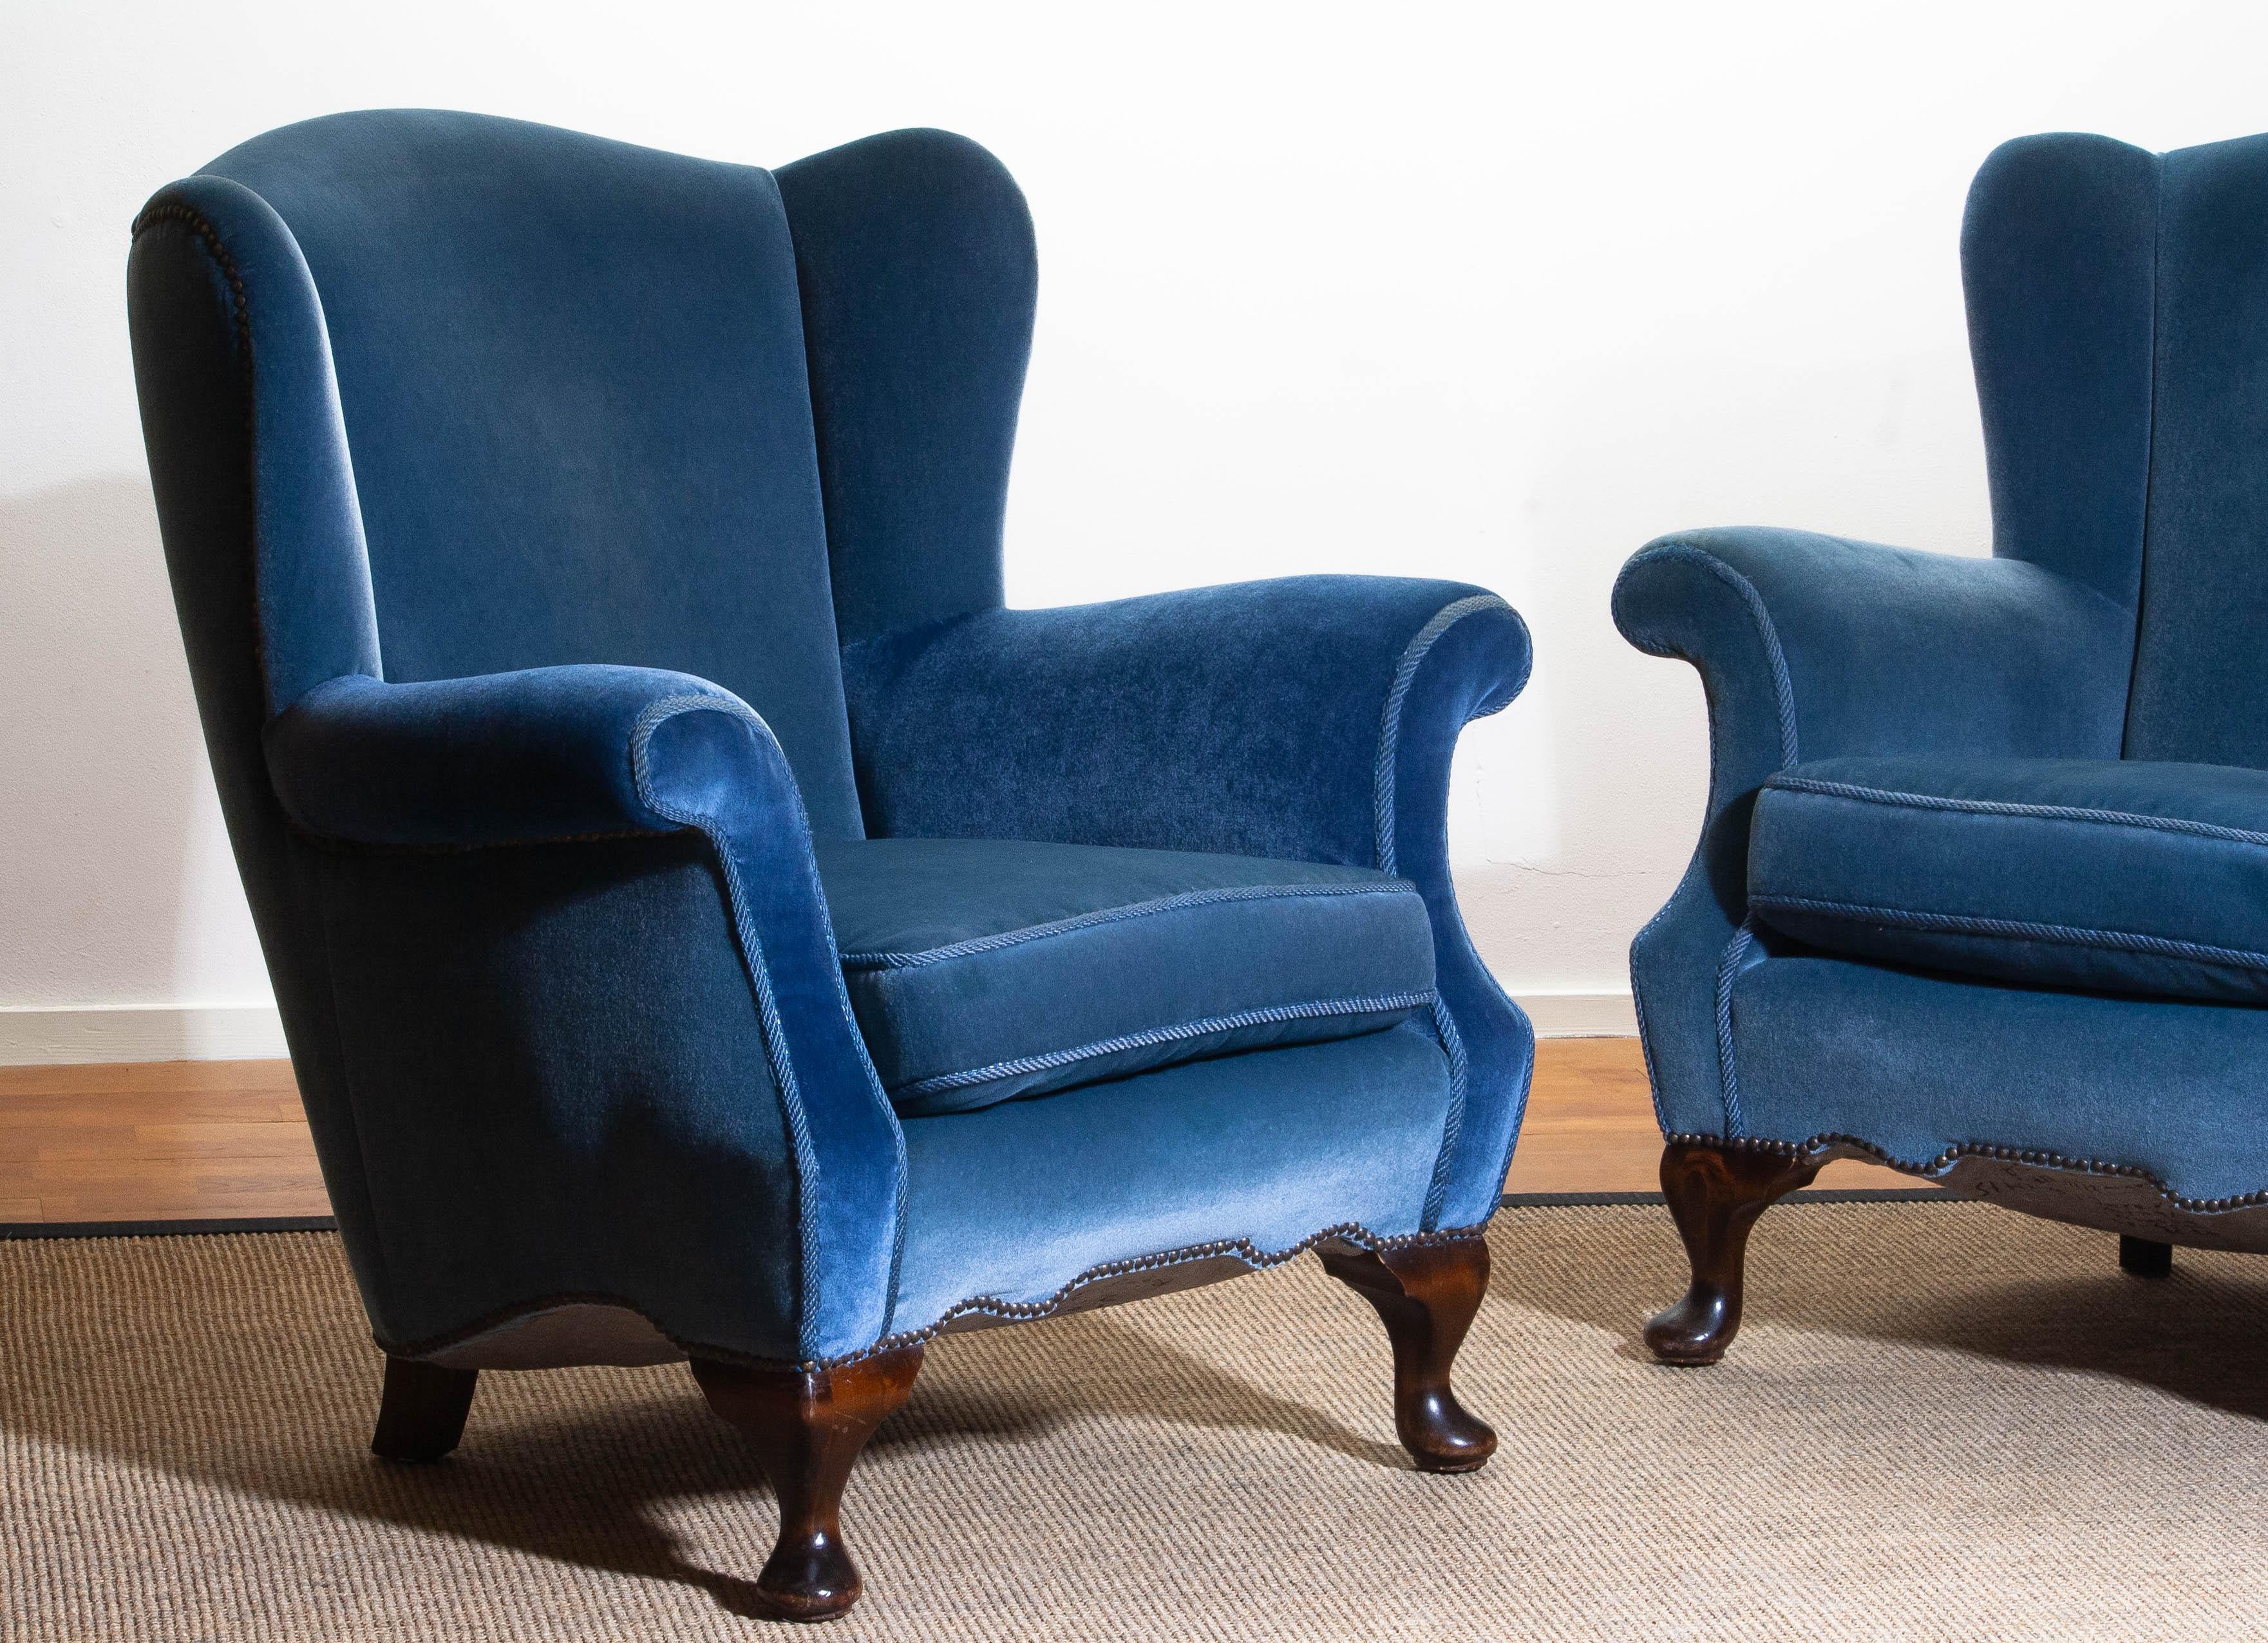 Unique set of two extremely beautiful Swedish club chairs in blue velvet from the 1920s.
The chairs are completely restored in 1987 (only original materials are used) and after one of the chairs received
new velvet on the armrests. See